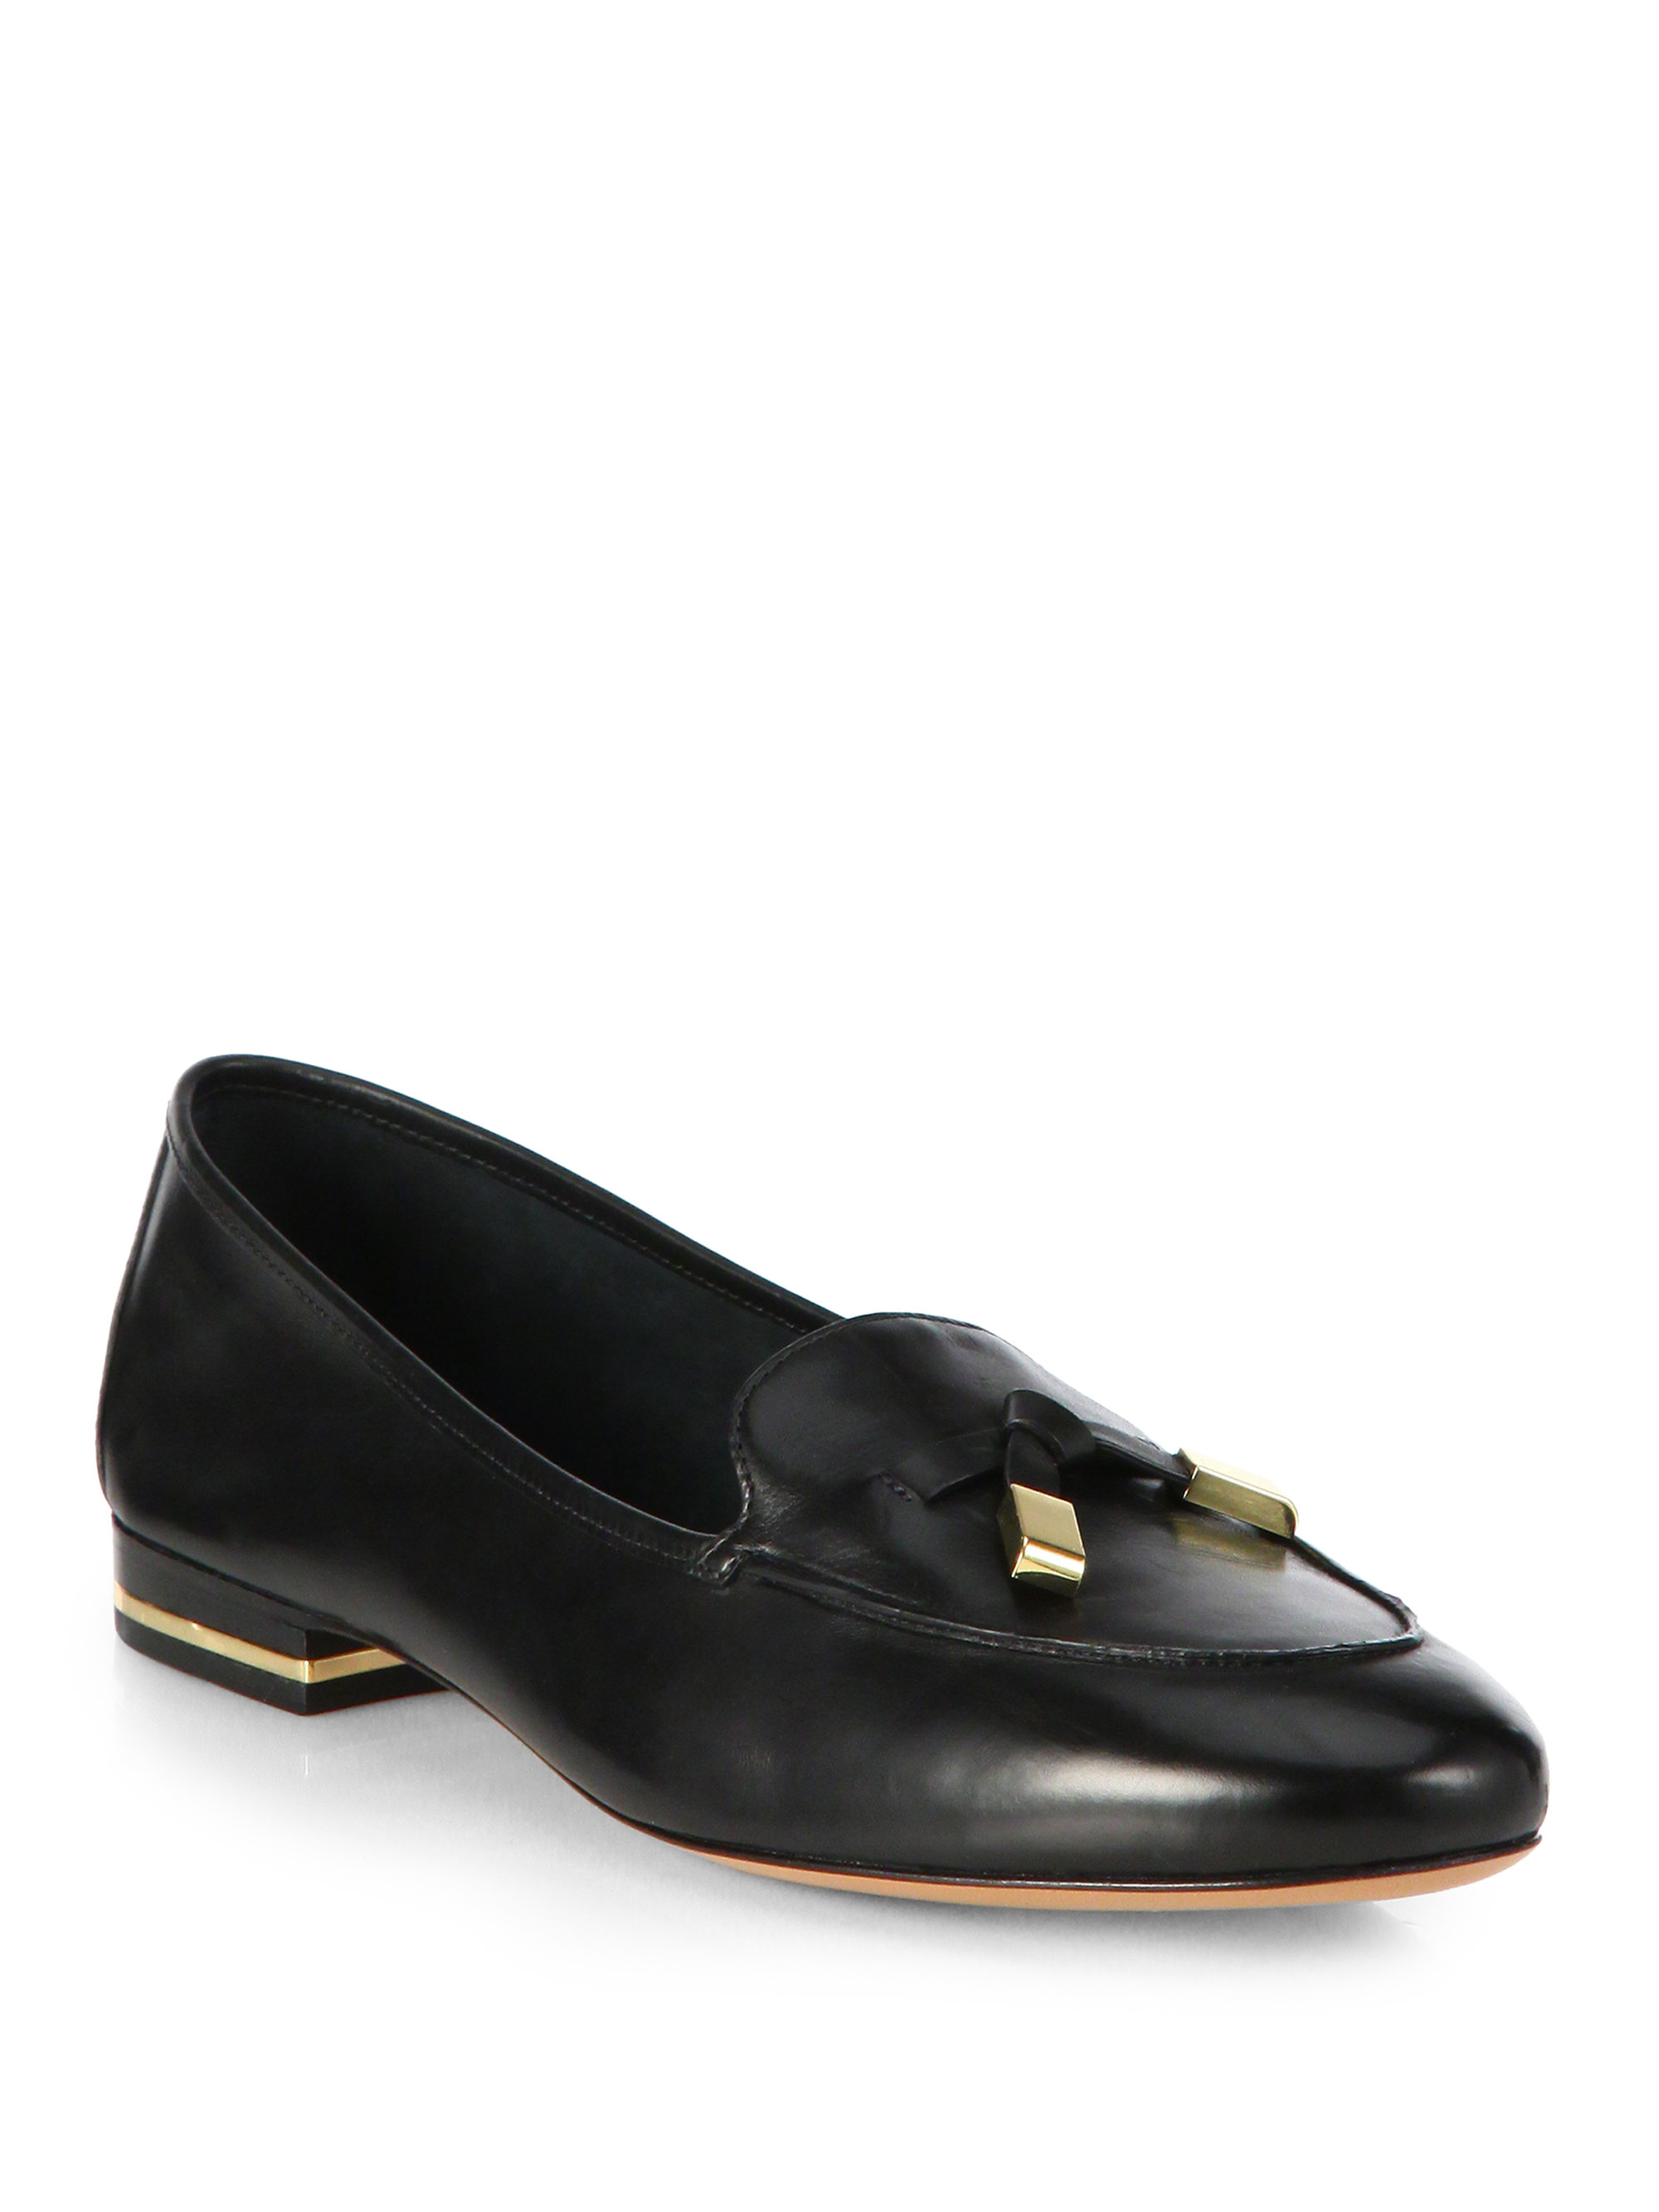 Lyst - Michael Kors Jemma Leather Loafers in Black